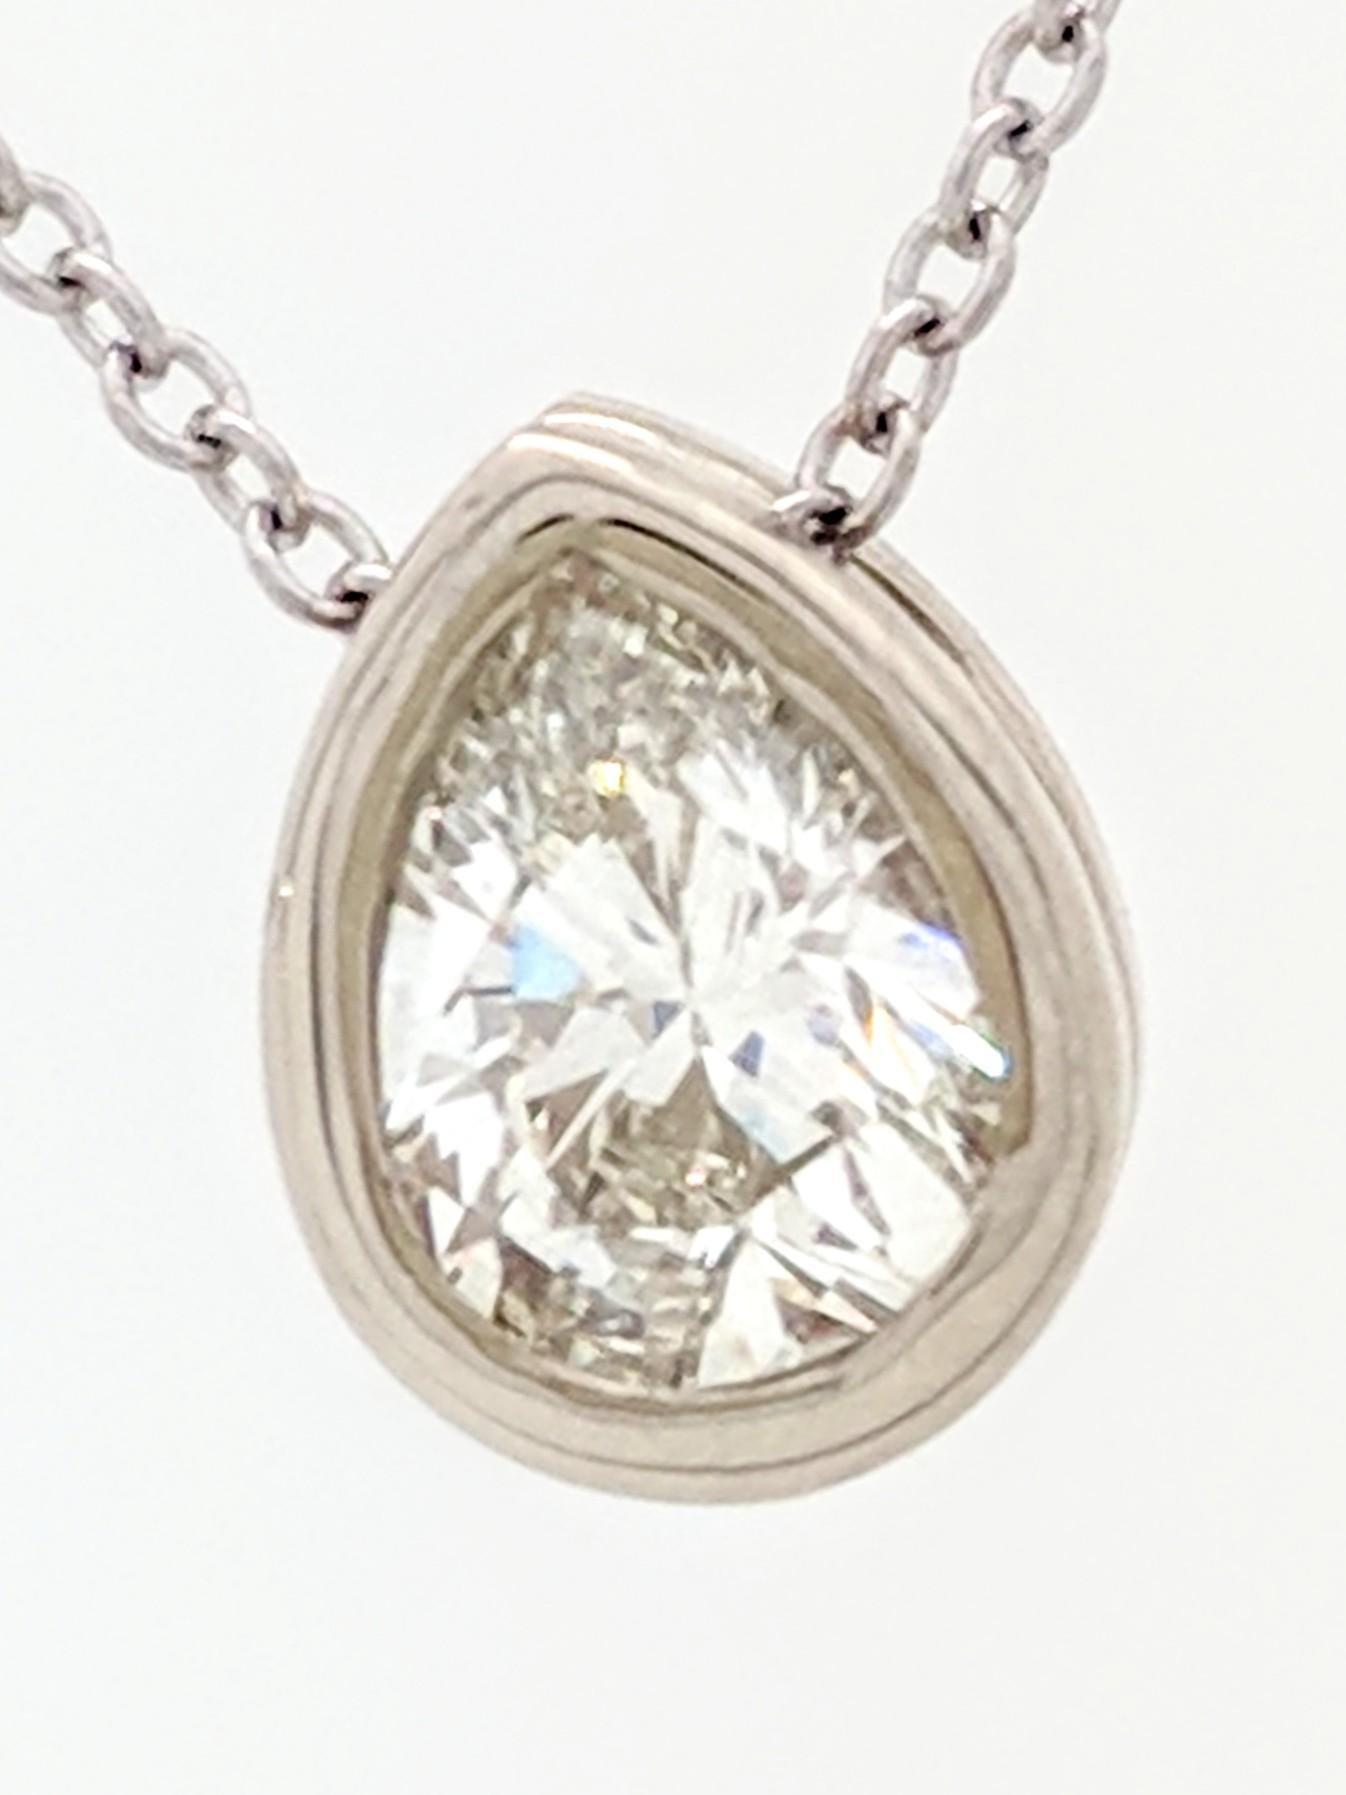 You are viewing a stunning .58ct. natural pear cut diamond. We estimate this diamond to be SI1 in clarity and H color. The diamond is beautifully displayed in a brand new 14kwg bezel set mounting attached to a new 18